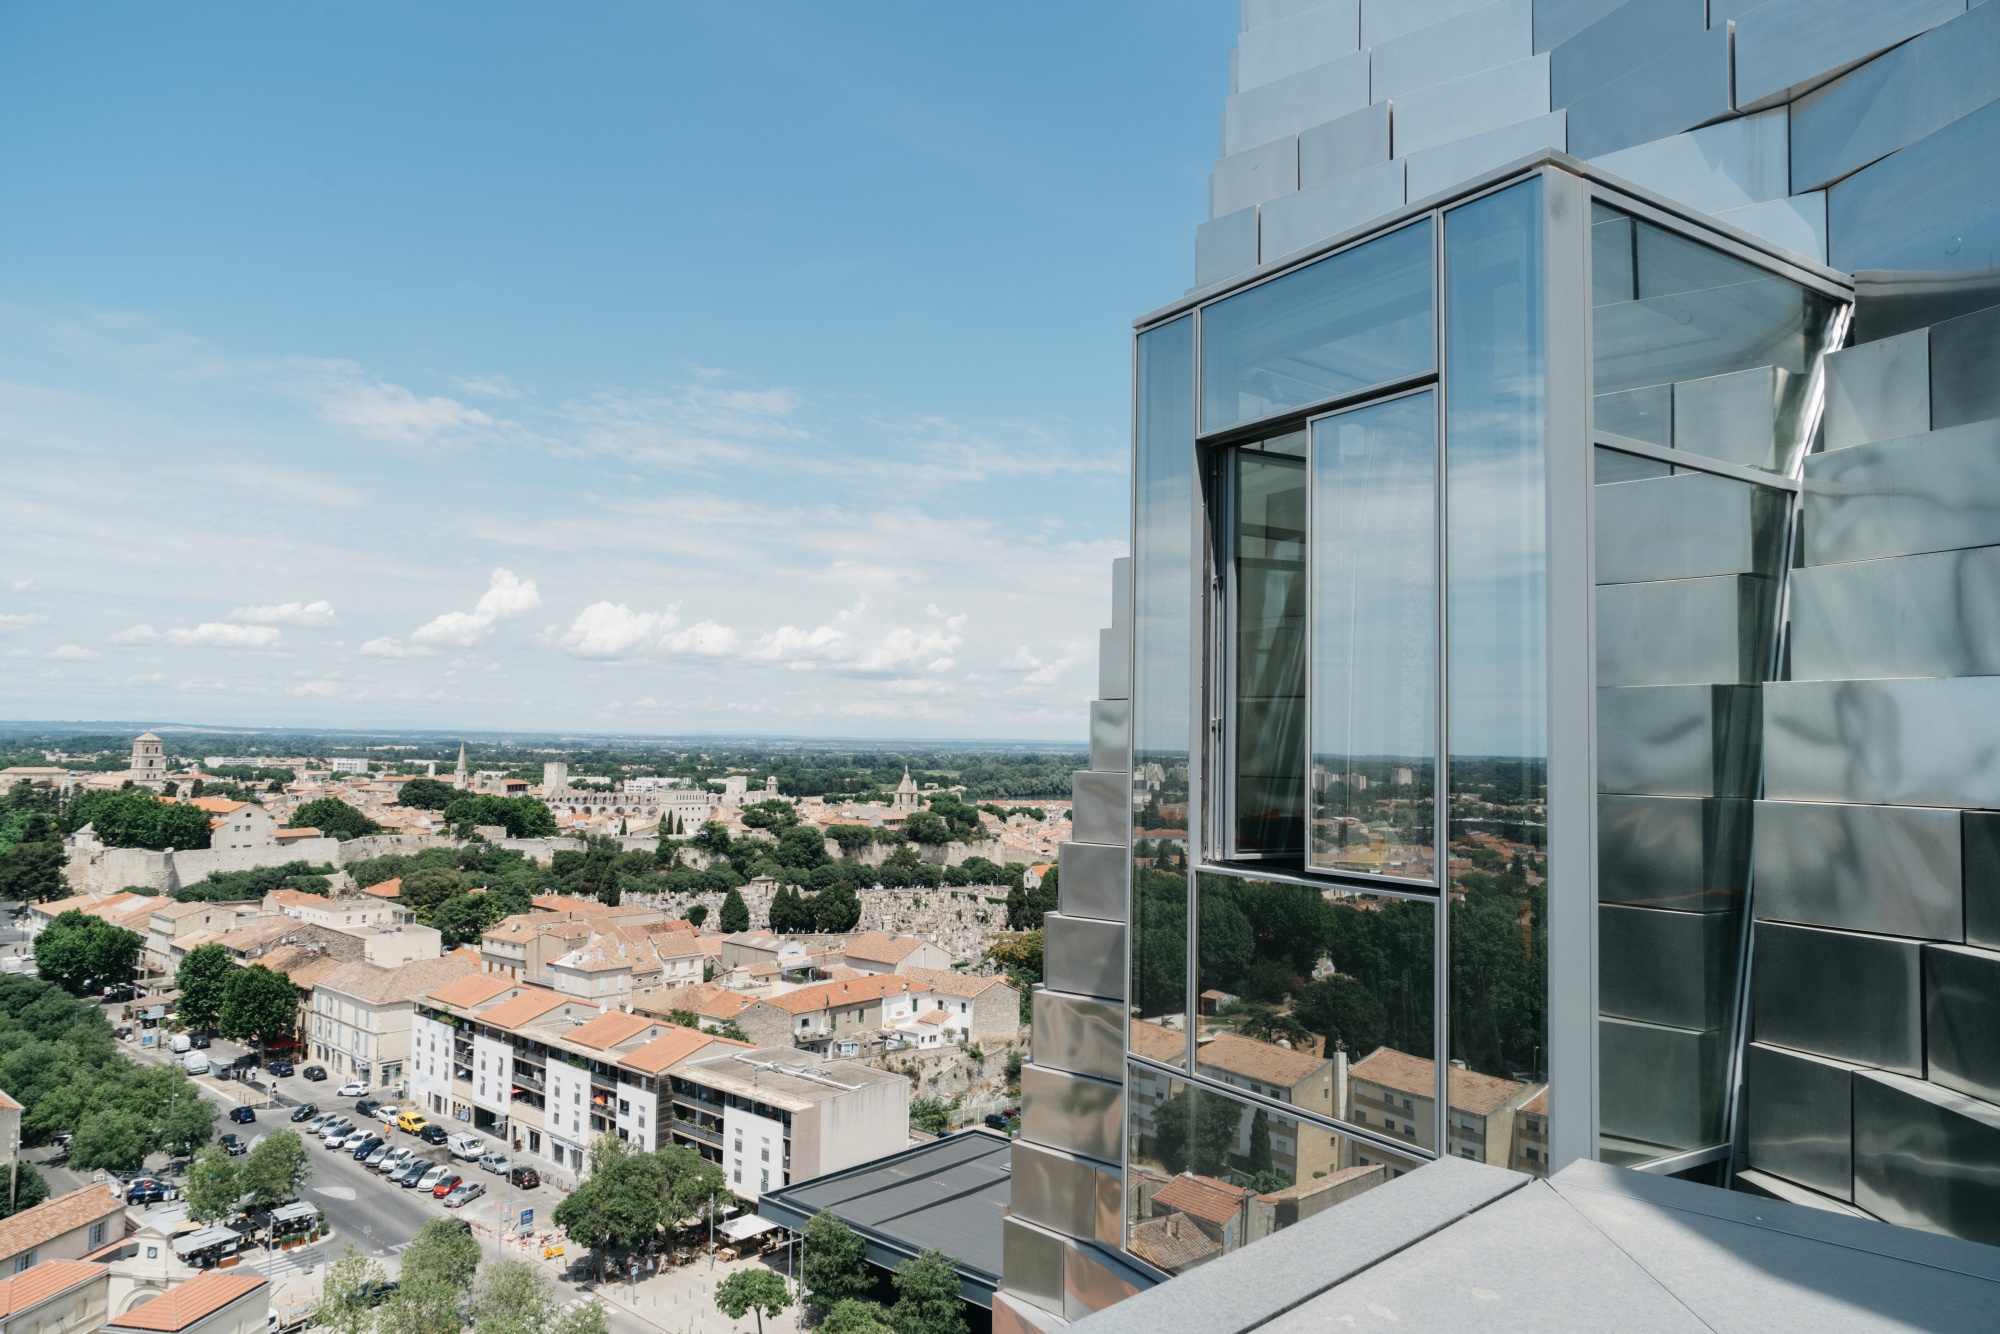 A New Frank Gehry Tower Rises Above the Quaint French Town of Arles, Arts  & Culture